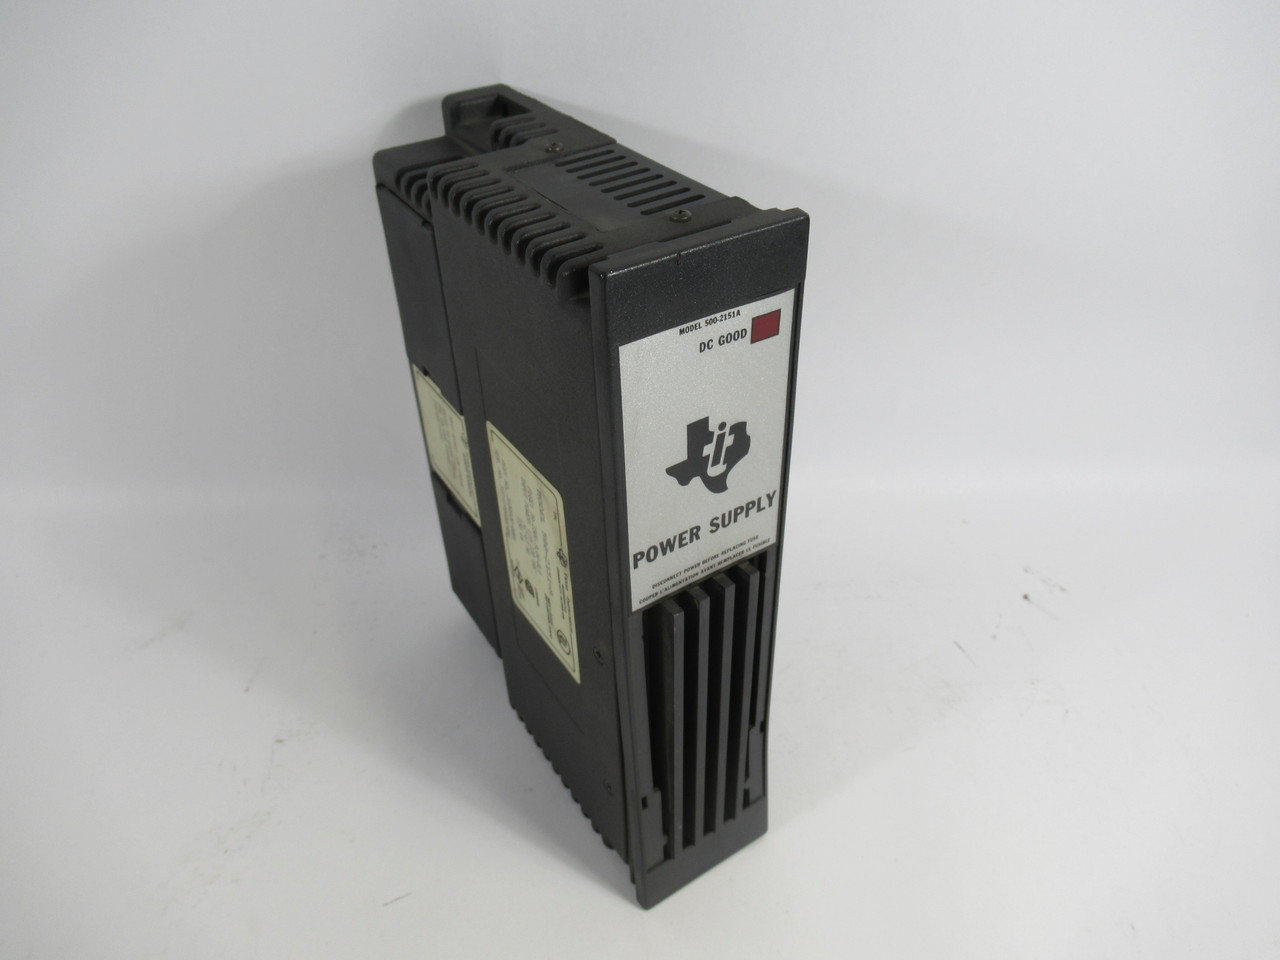 Texas Instruments 500-2151-A Power Supply *Damage to Enclosure* USED